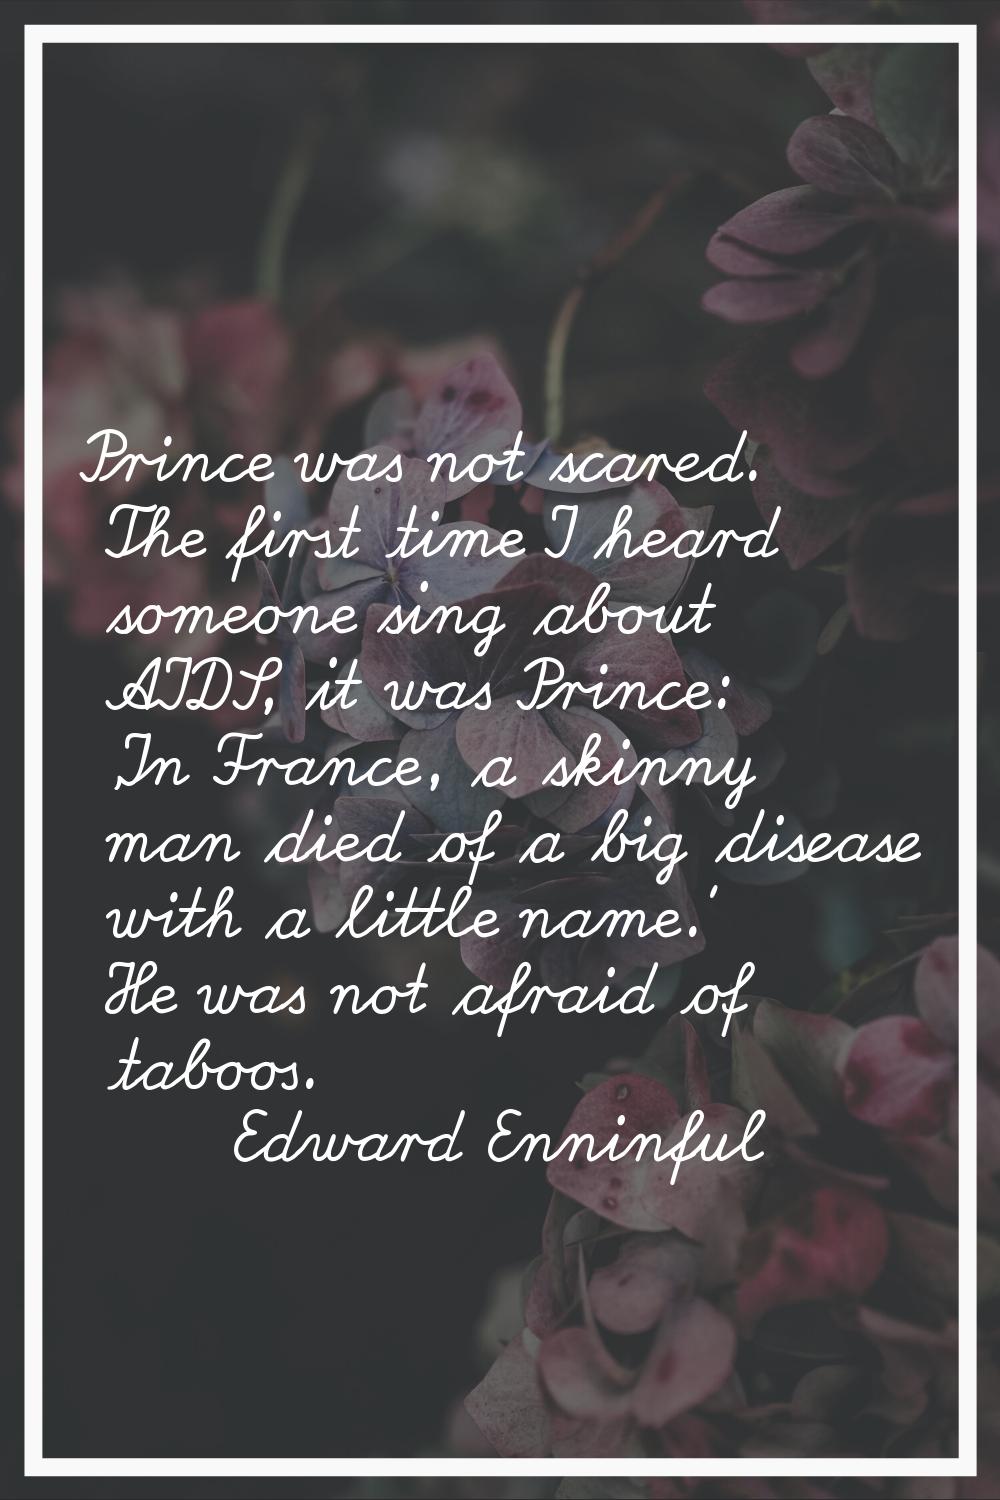 Prince was not scared. The first time I heard someone sing about AIDS, it was Prince: 'In France, a